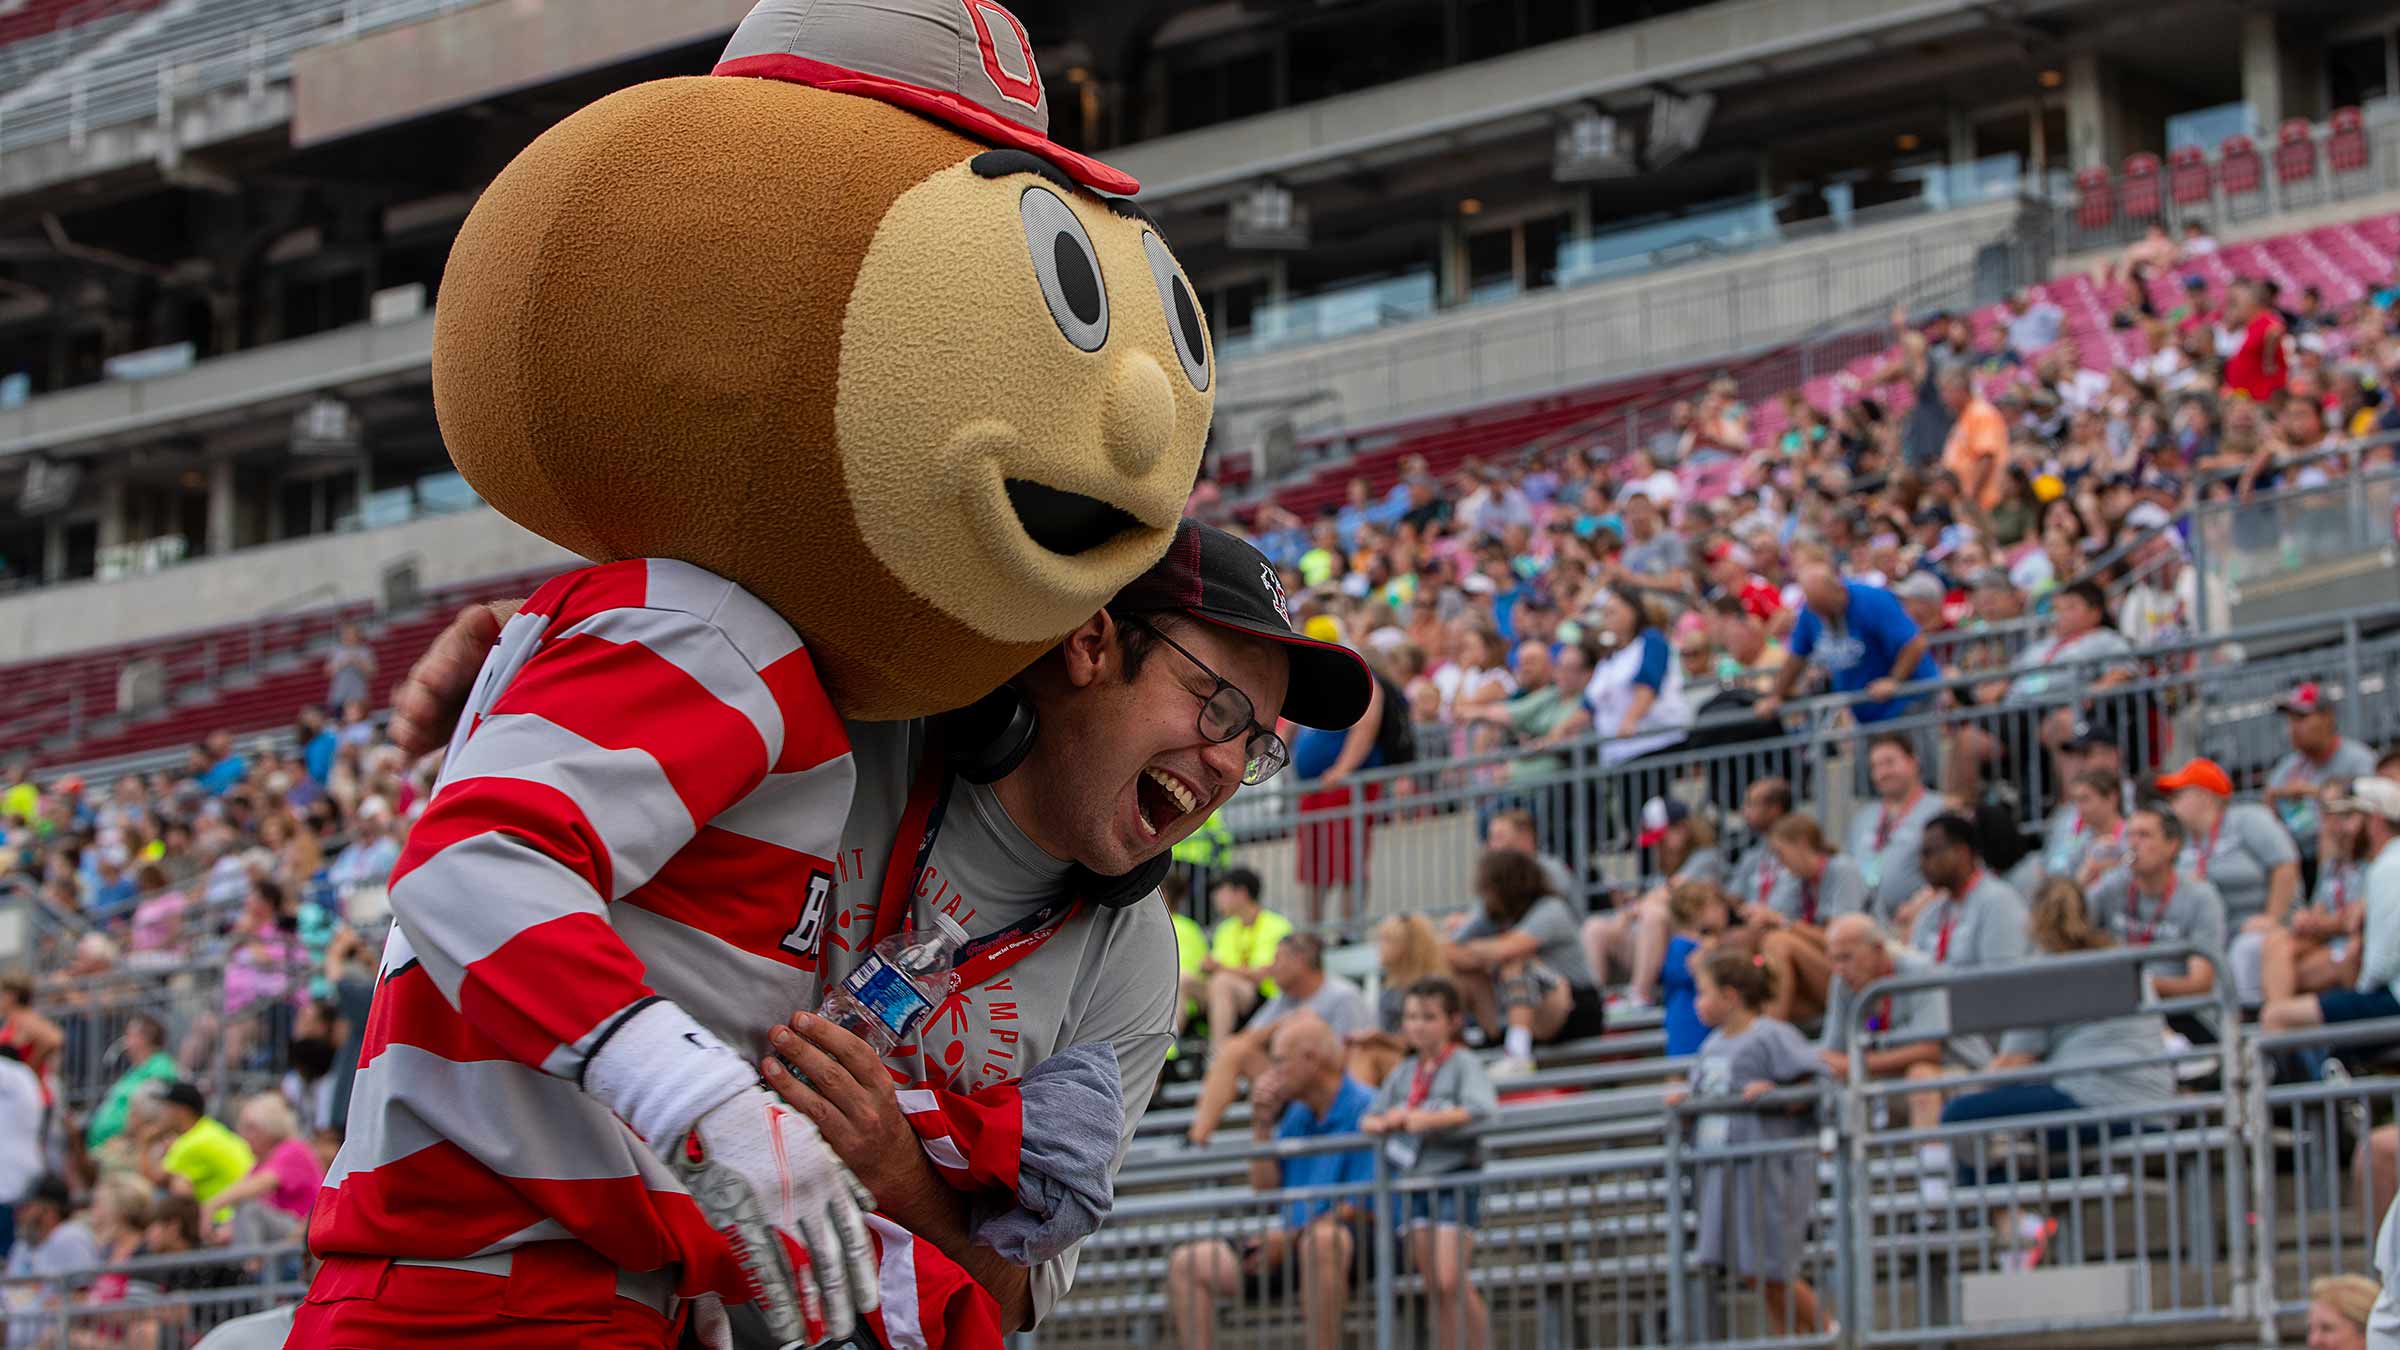 Brutus Buckeye hugging a Special Olympics participant